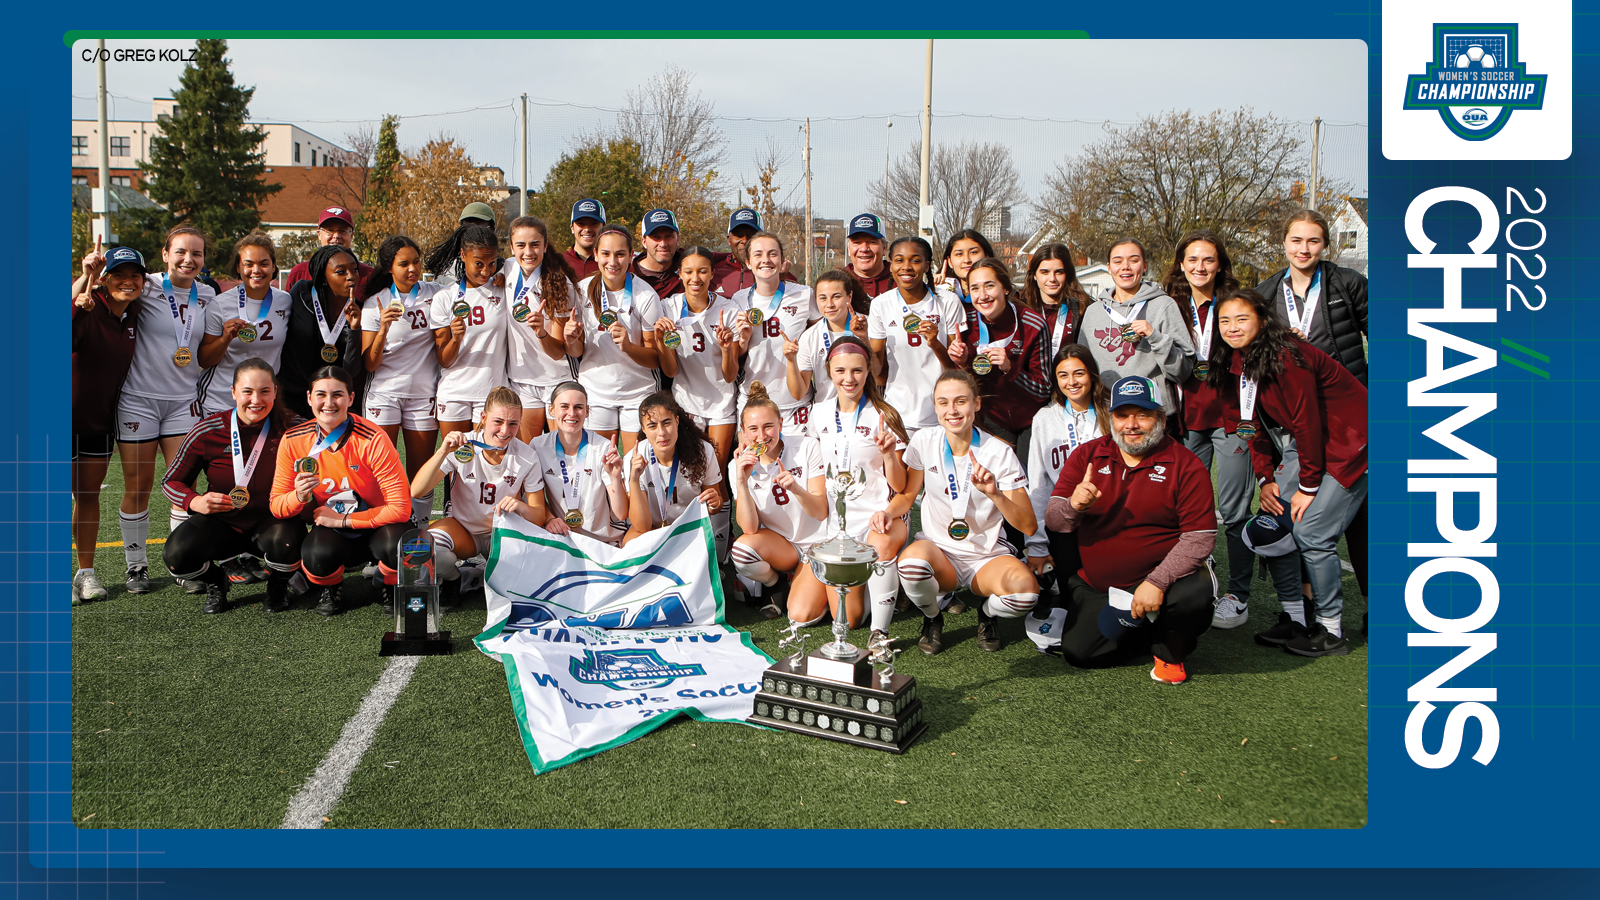 Predominantly blue graphic covered mostly by 2022 OUA Women's Soccer Championship banner photo, with the corresponding championship logo and white text reading '2022 Champions' on the right side